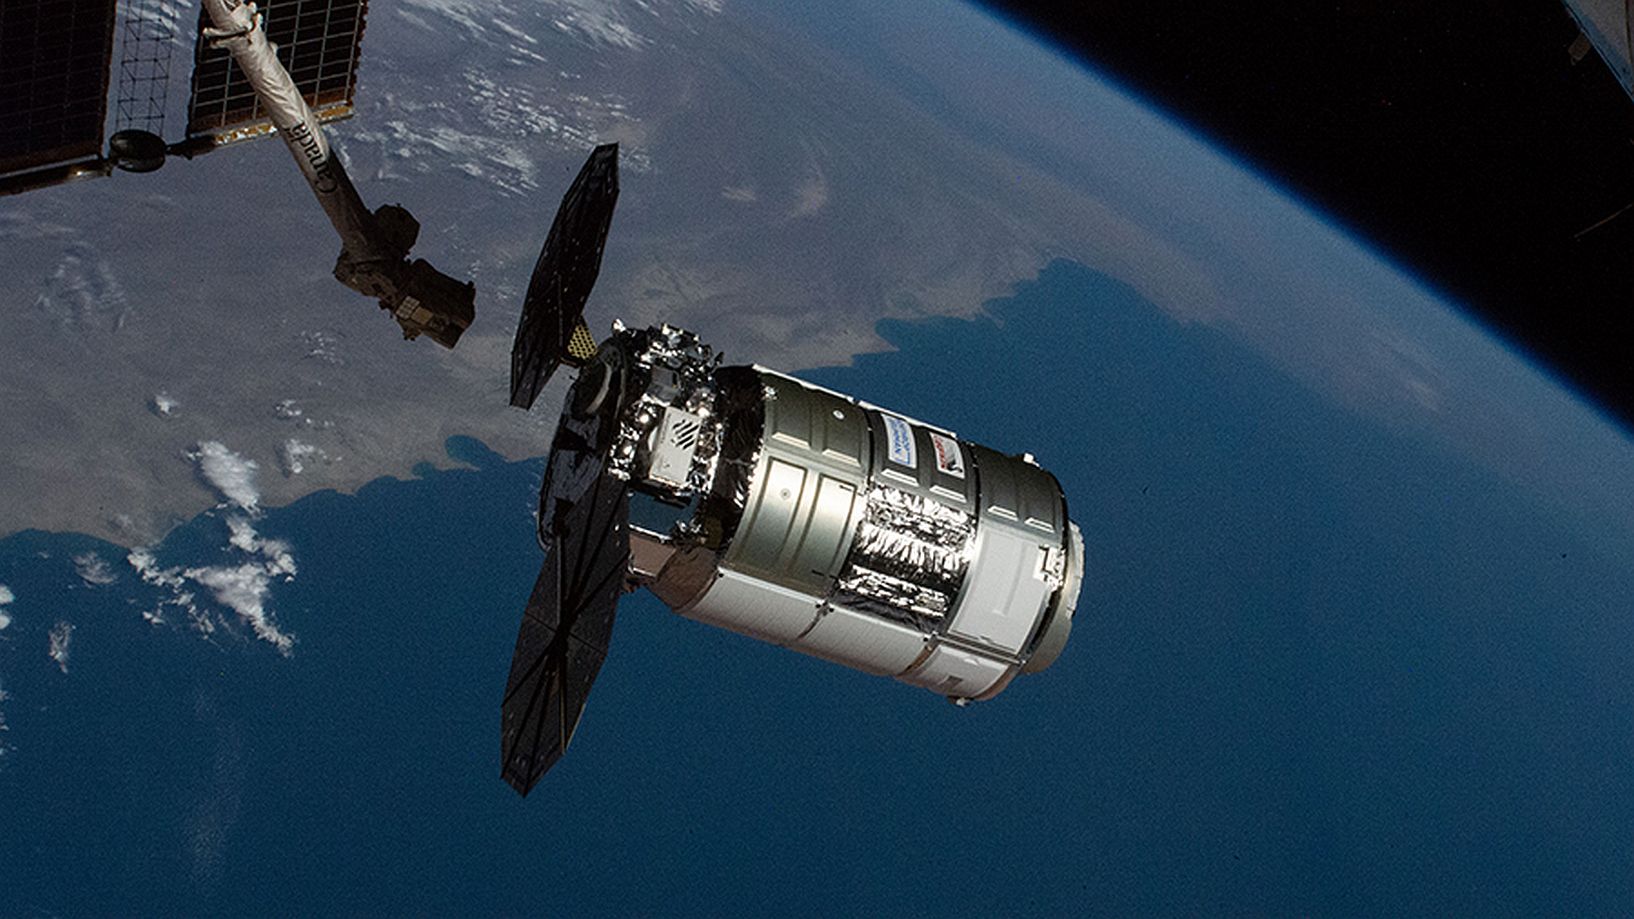 15 Cygnus Spacecraft Departs International Space Station To Begin Secondary Mission